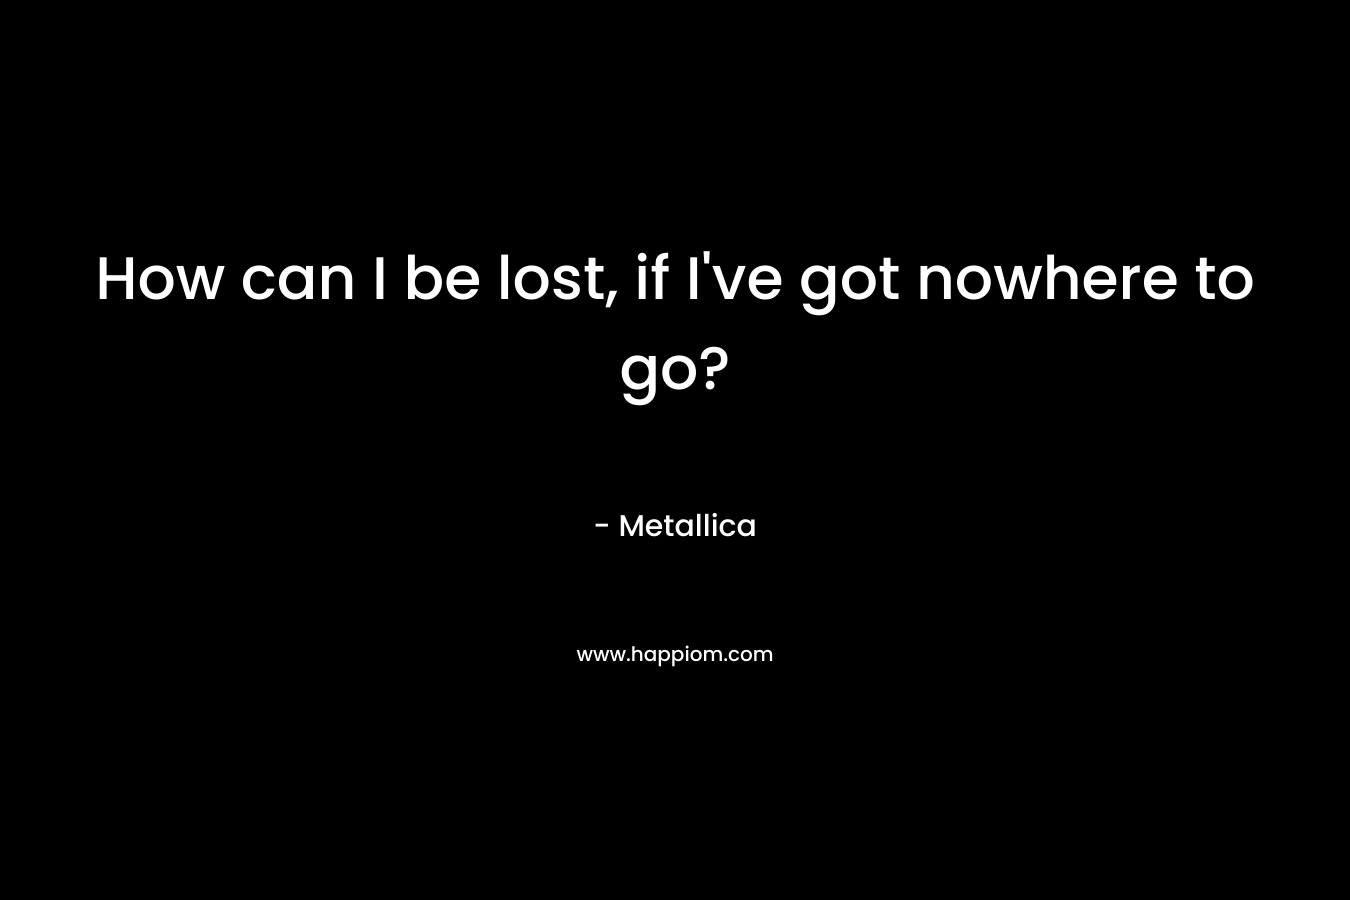 How can I be lost, if I’ve got nowhere to go? – Metallica